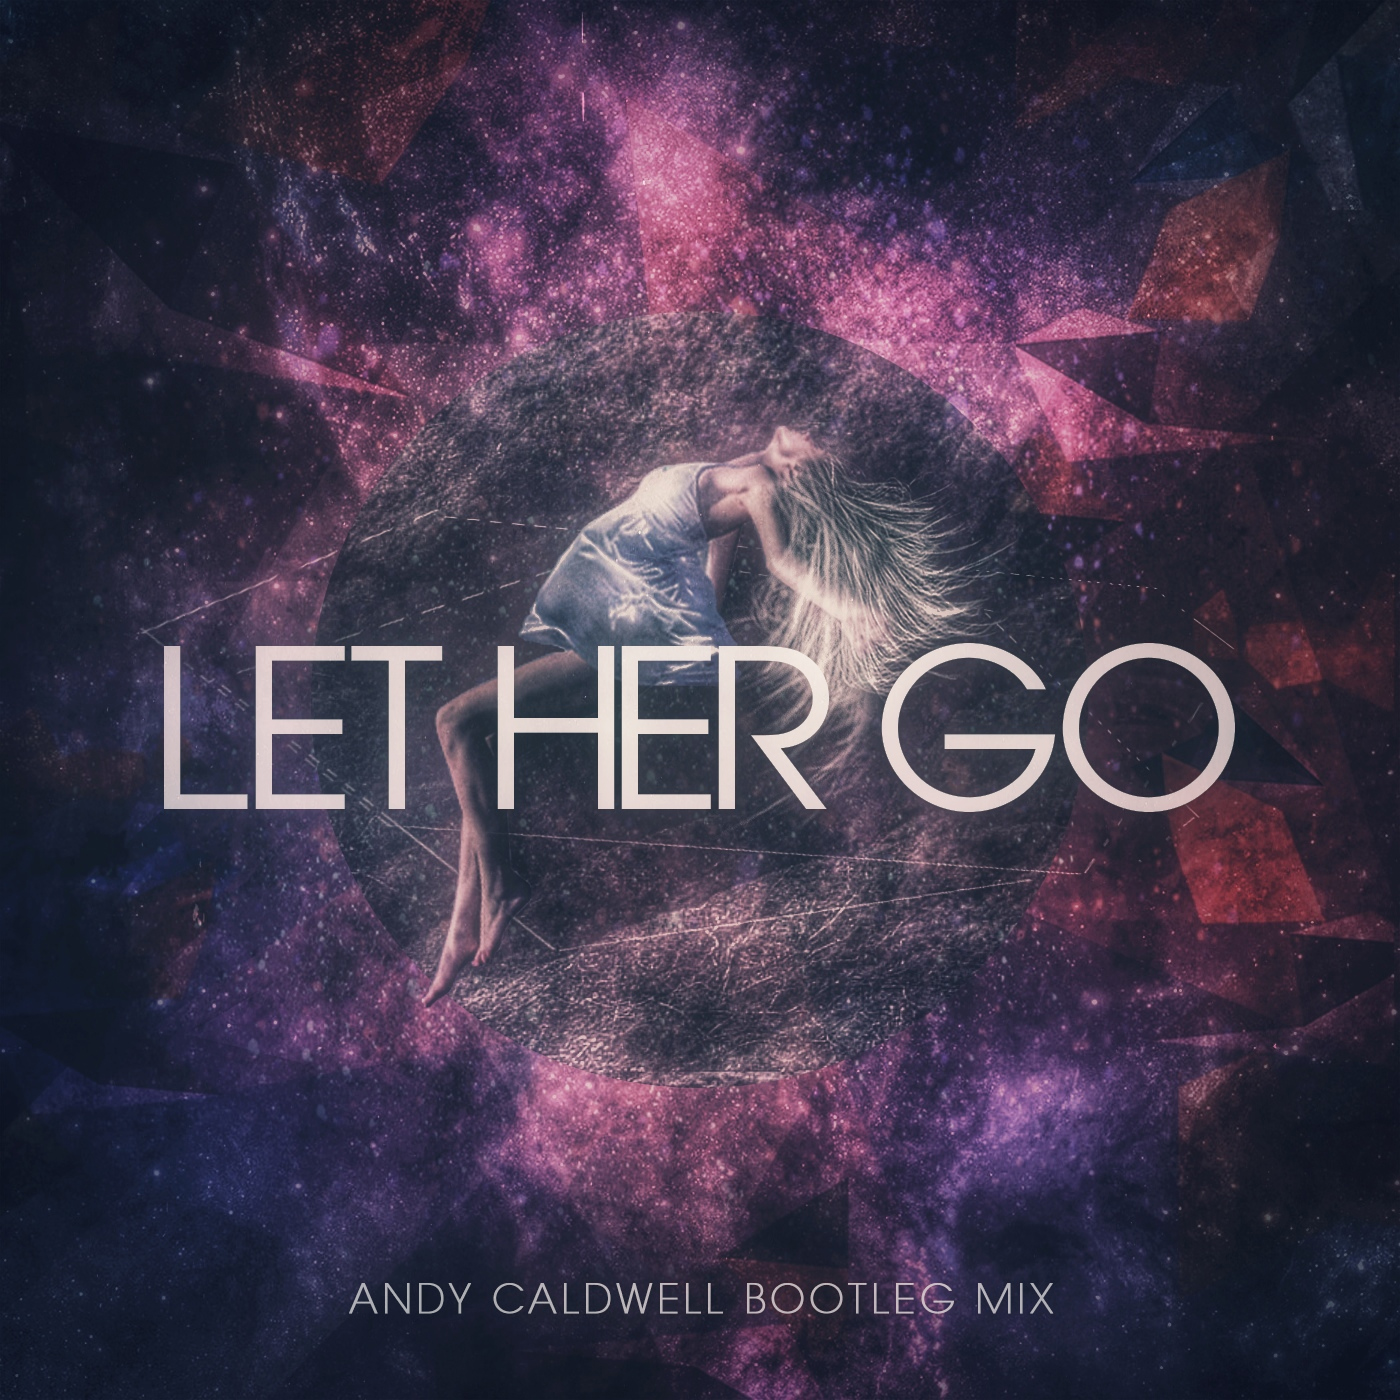 [HOUSE] Passenger – “Let Her Go” (Andy Caldwell Bootleg Mix) [FREE DOWNLOAD]